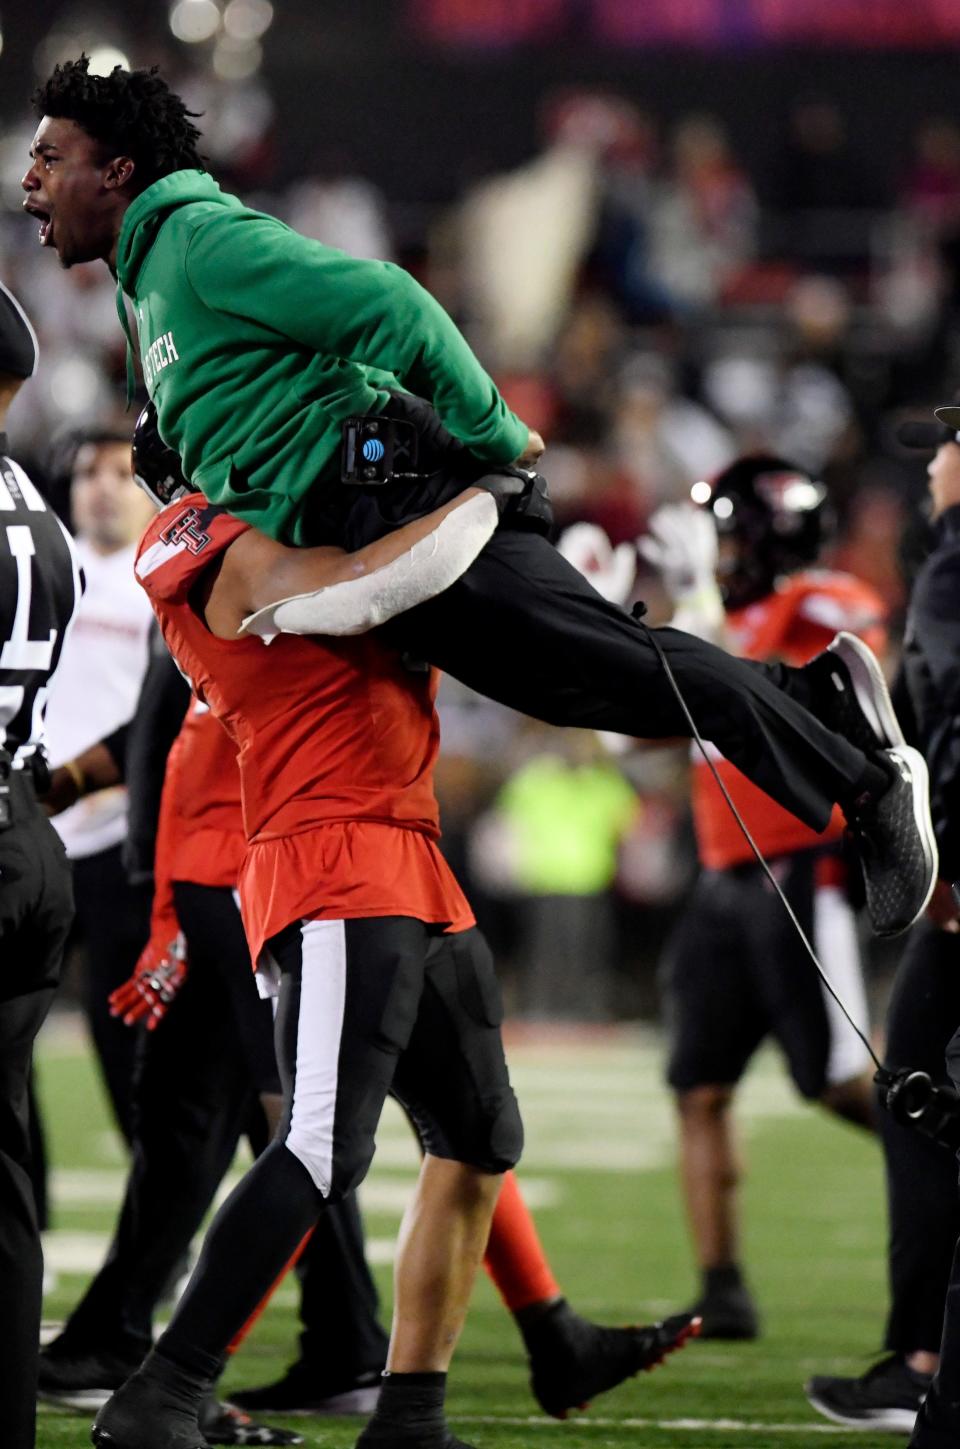 Texas Tech linebacker Kosi Eldridge gives graduate assistant Jah'Shawn Johnson a lift as the Red Raiders celebrate their overtime victory over Oklahoma in November 2022. Johnson is completing his second year on the Tech staff after he was a four-year starter at safety from 2015-18.